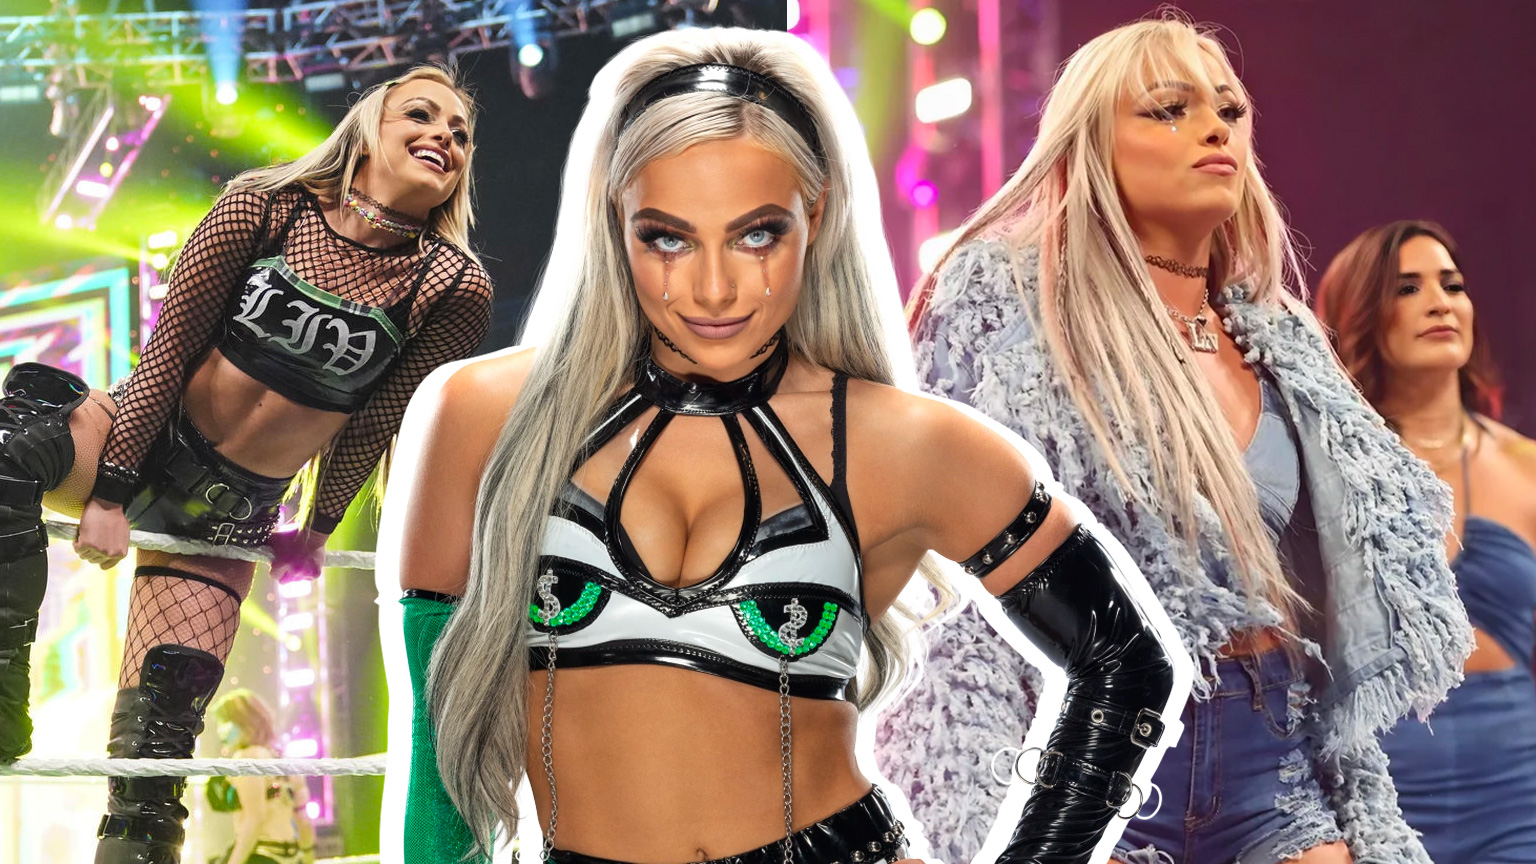 Why Was Liv Morgan Gone From WWE?